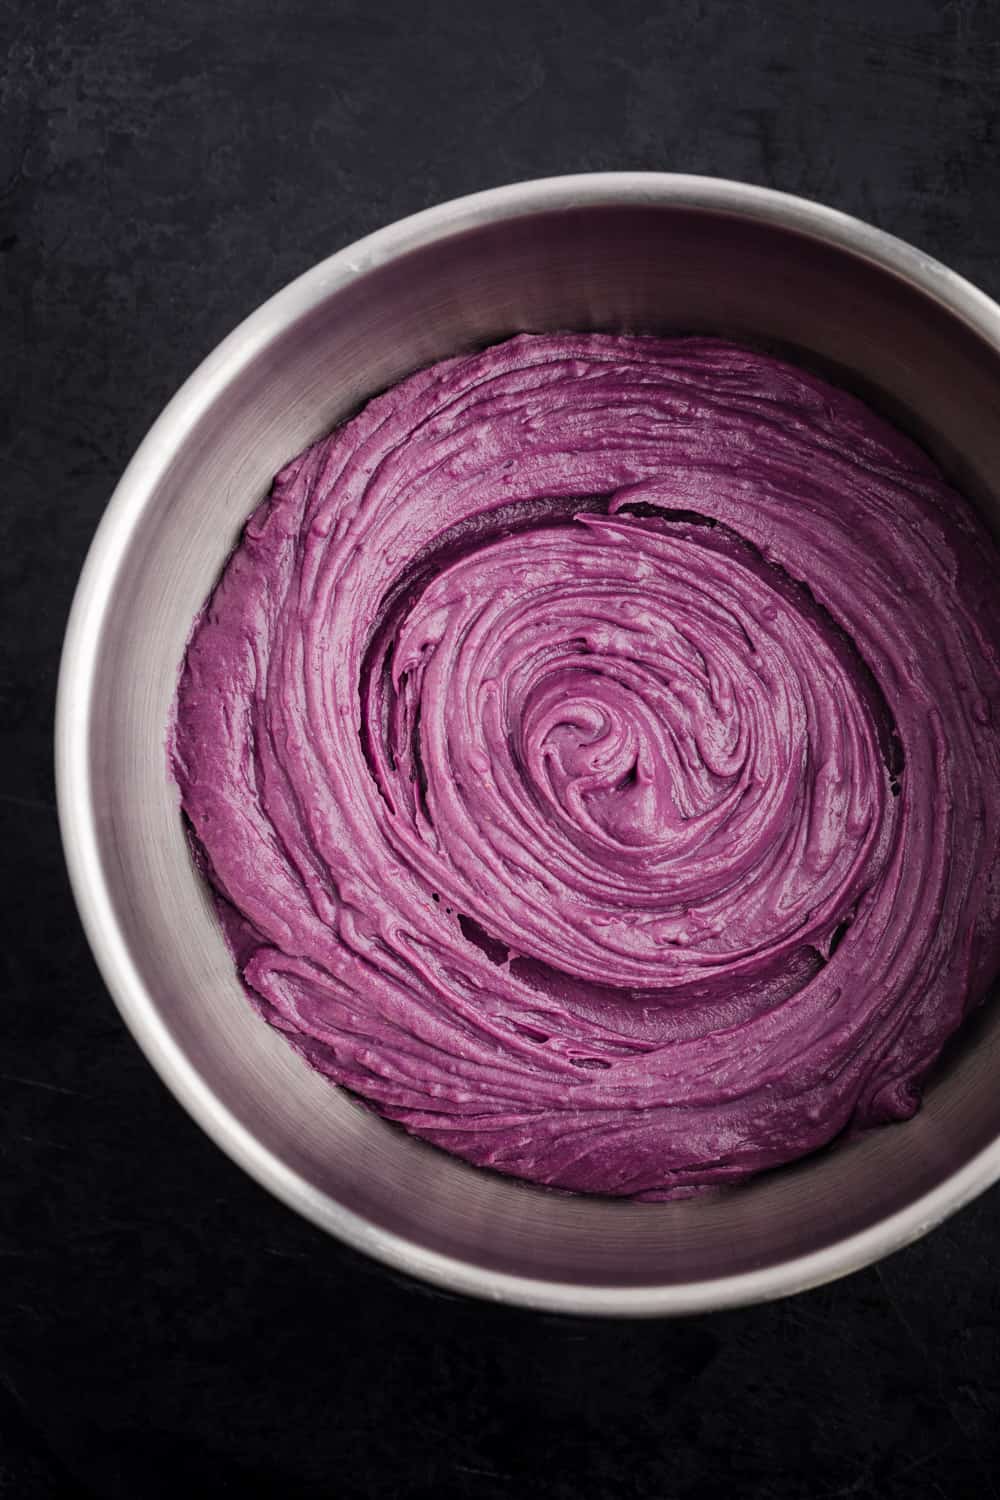 Purple sweet potato pie filling in a whisked together in a silver bowl; overhead shot on a black background.